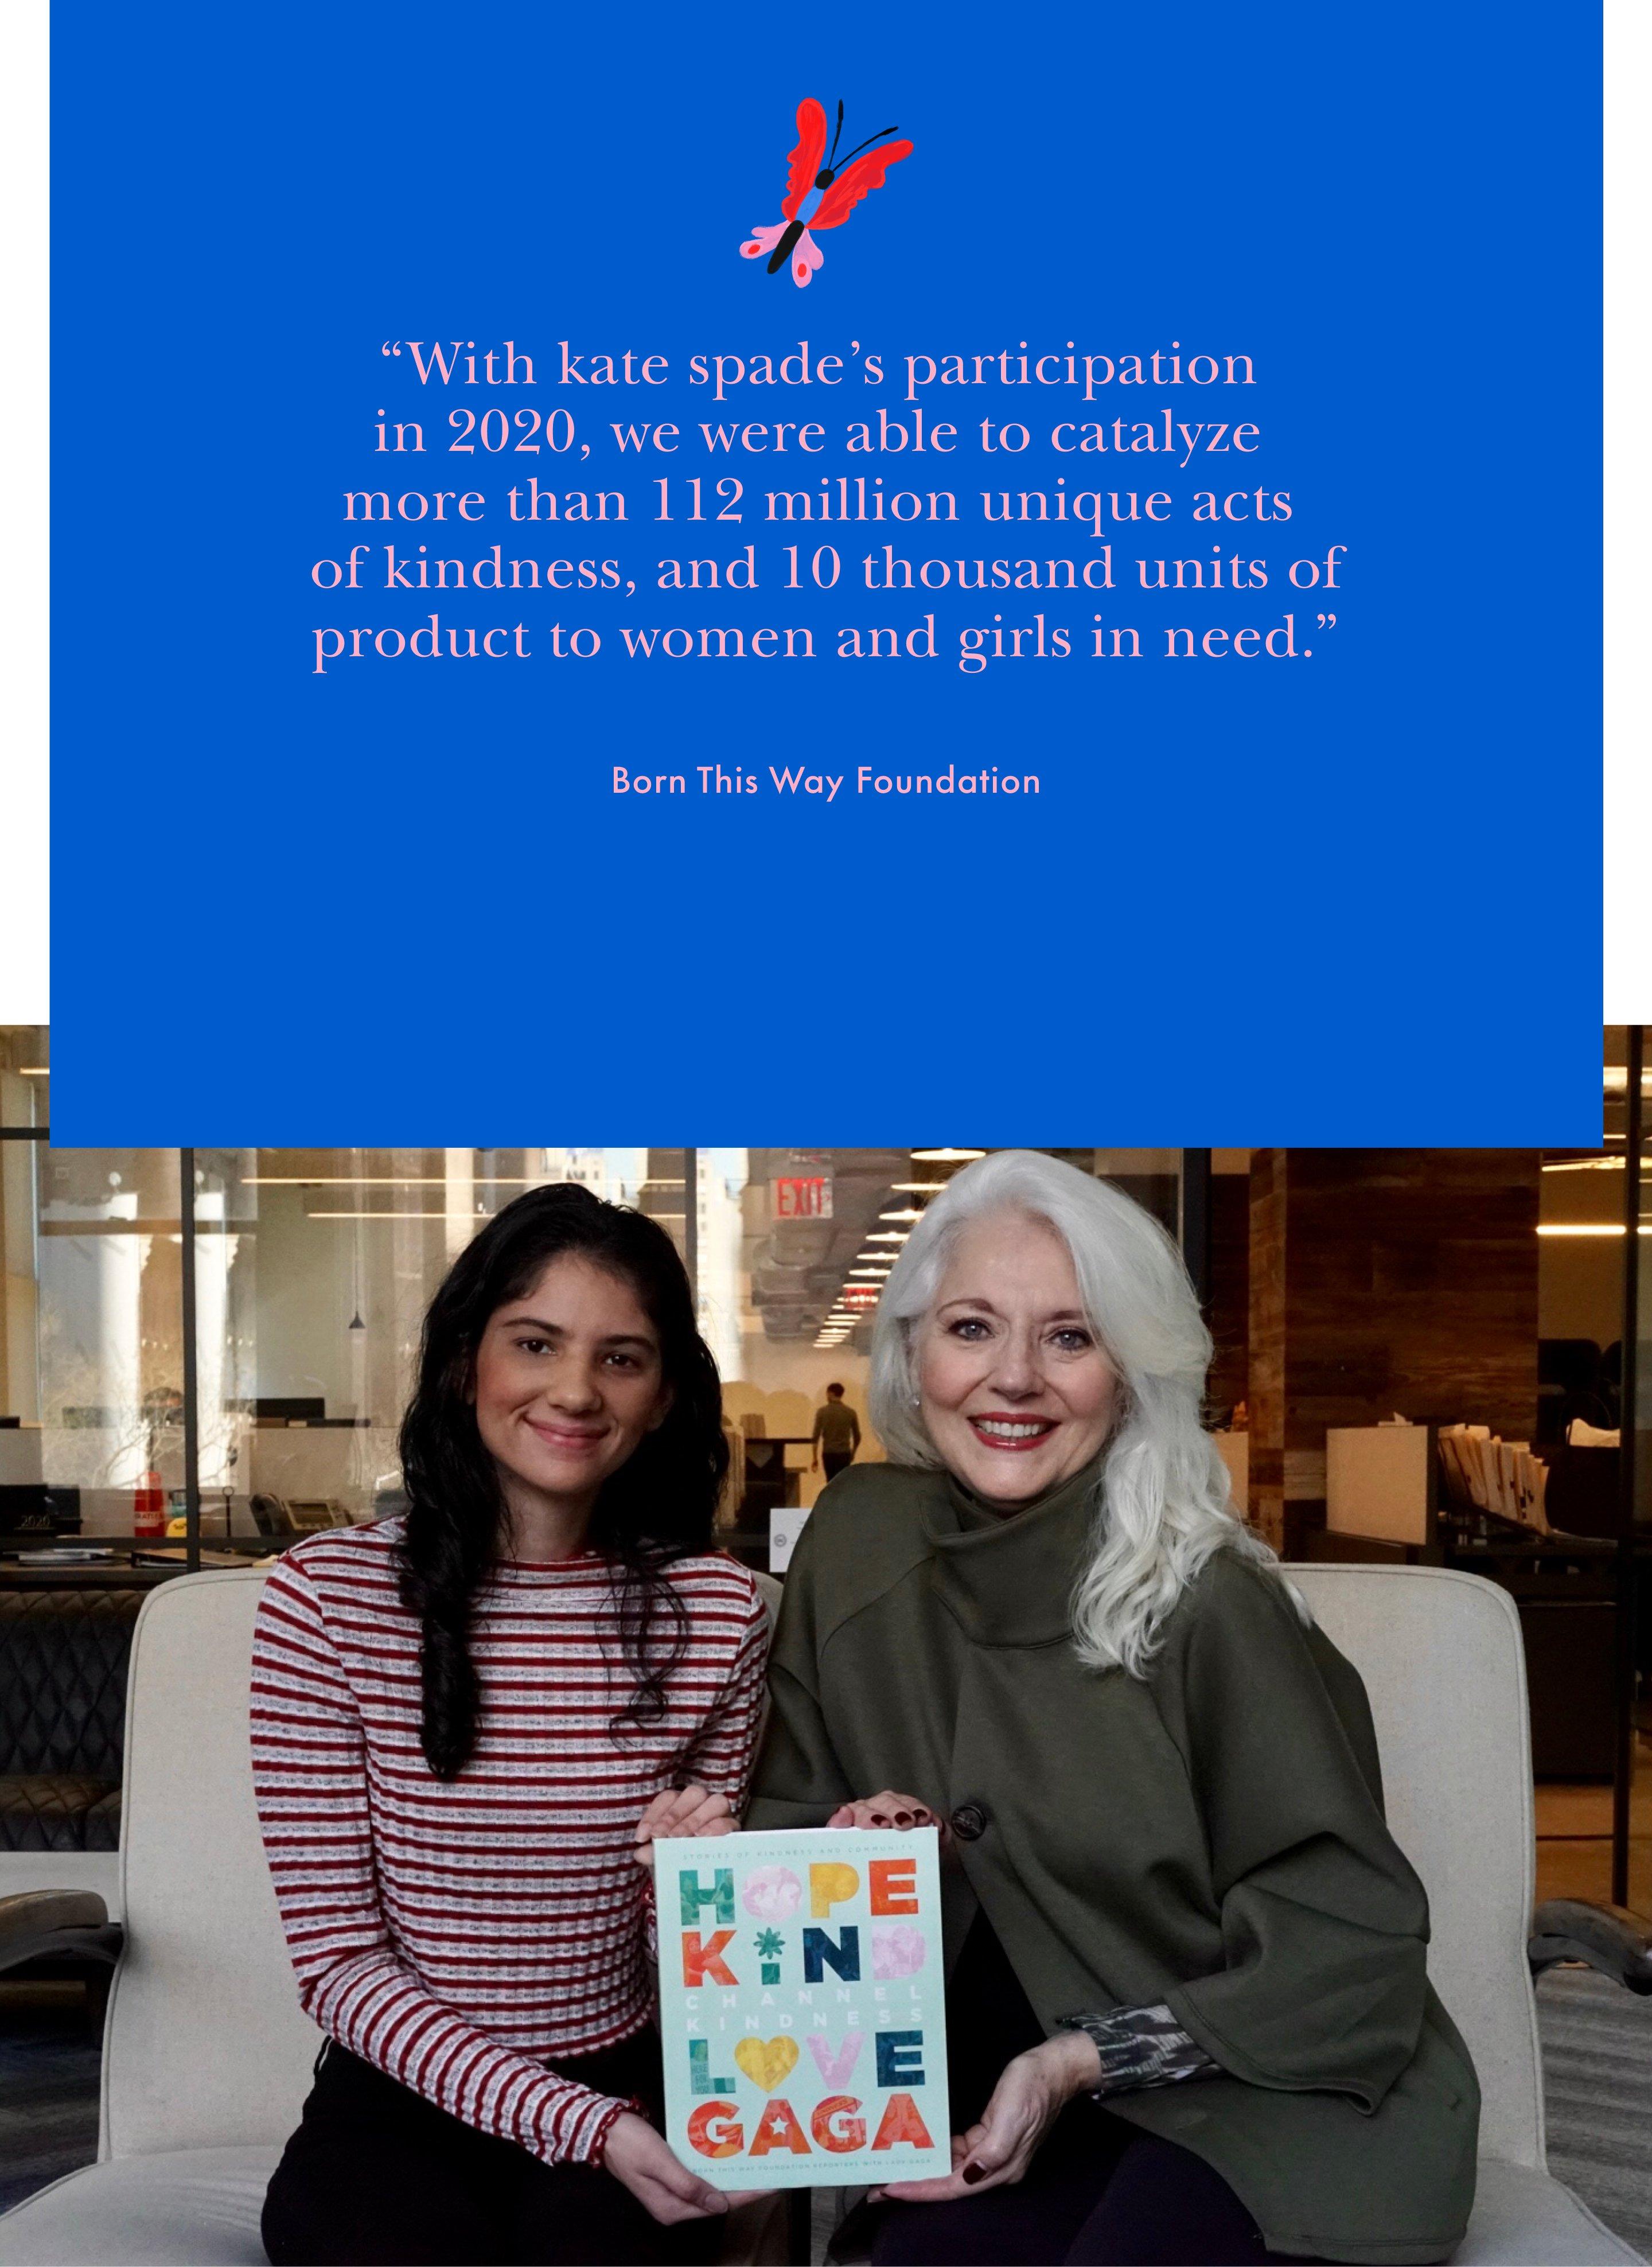 With kate spade's participation in 2020, we were able to catalyze more than 112 million unique acts of kindness, and 10 thousand units of product to women and girls in need. Born This Way Foundation